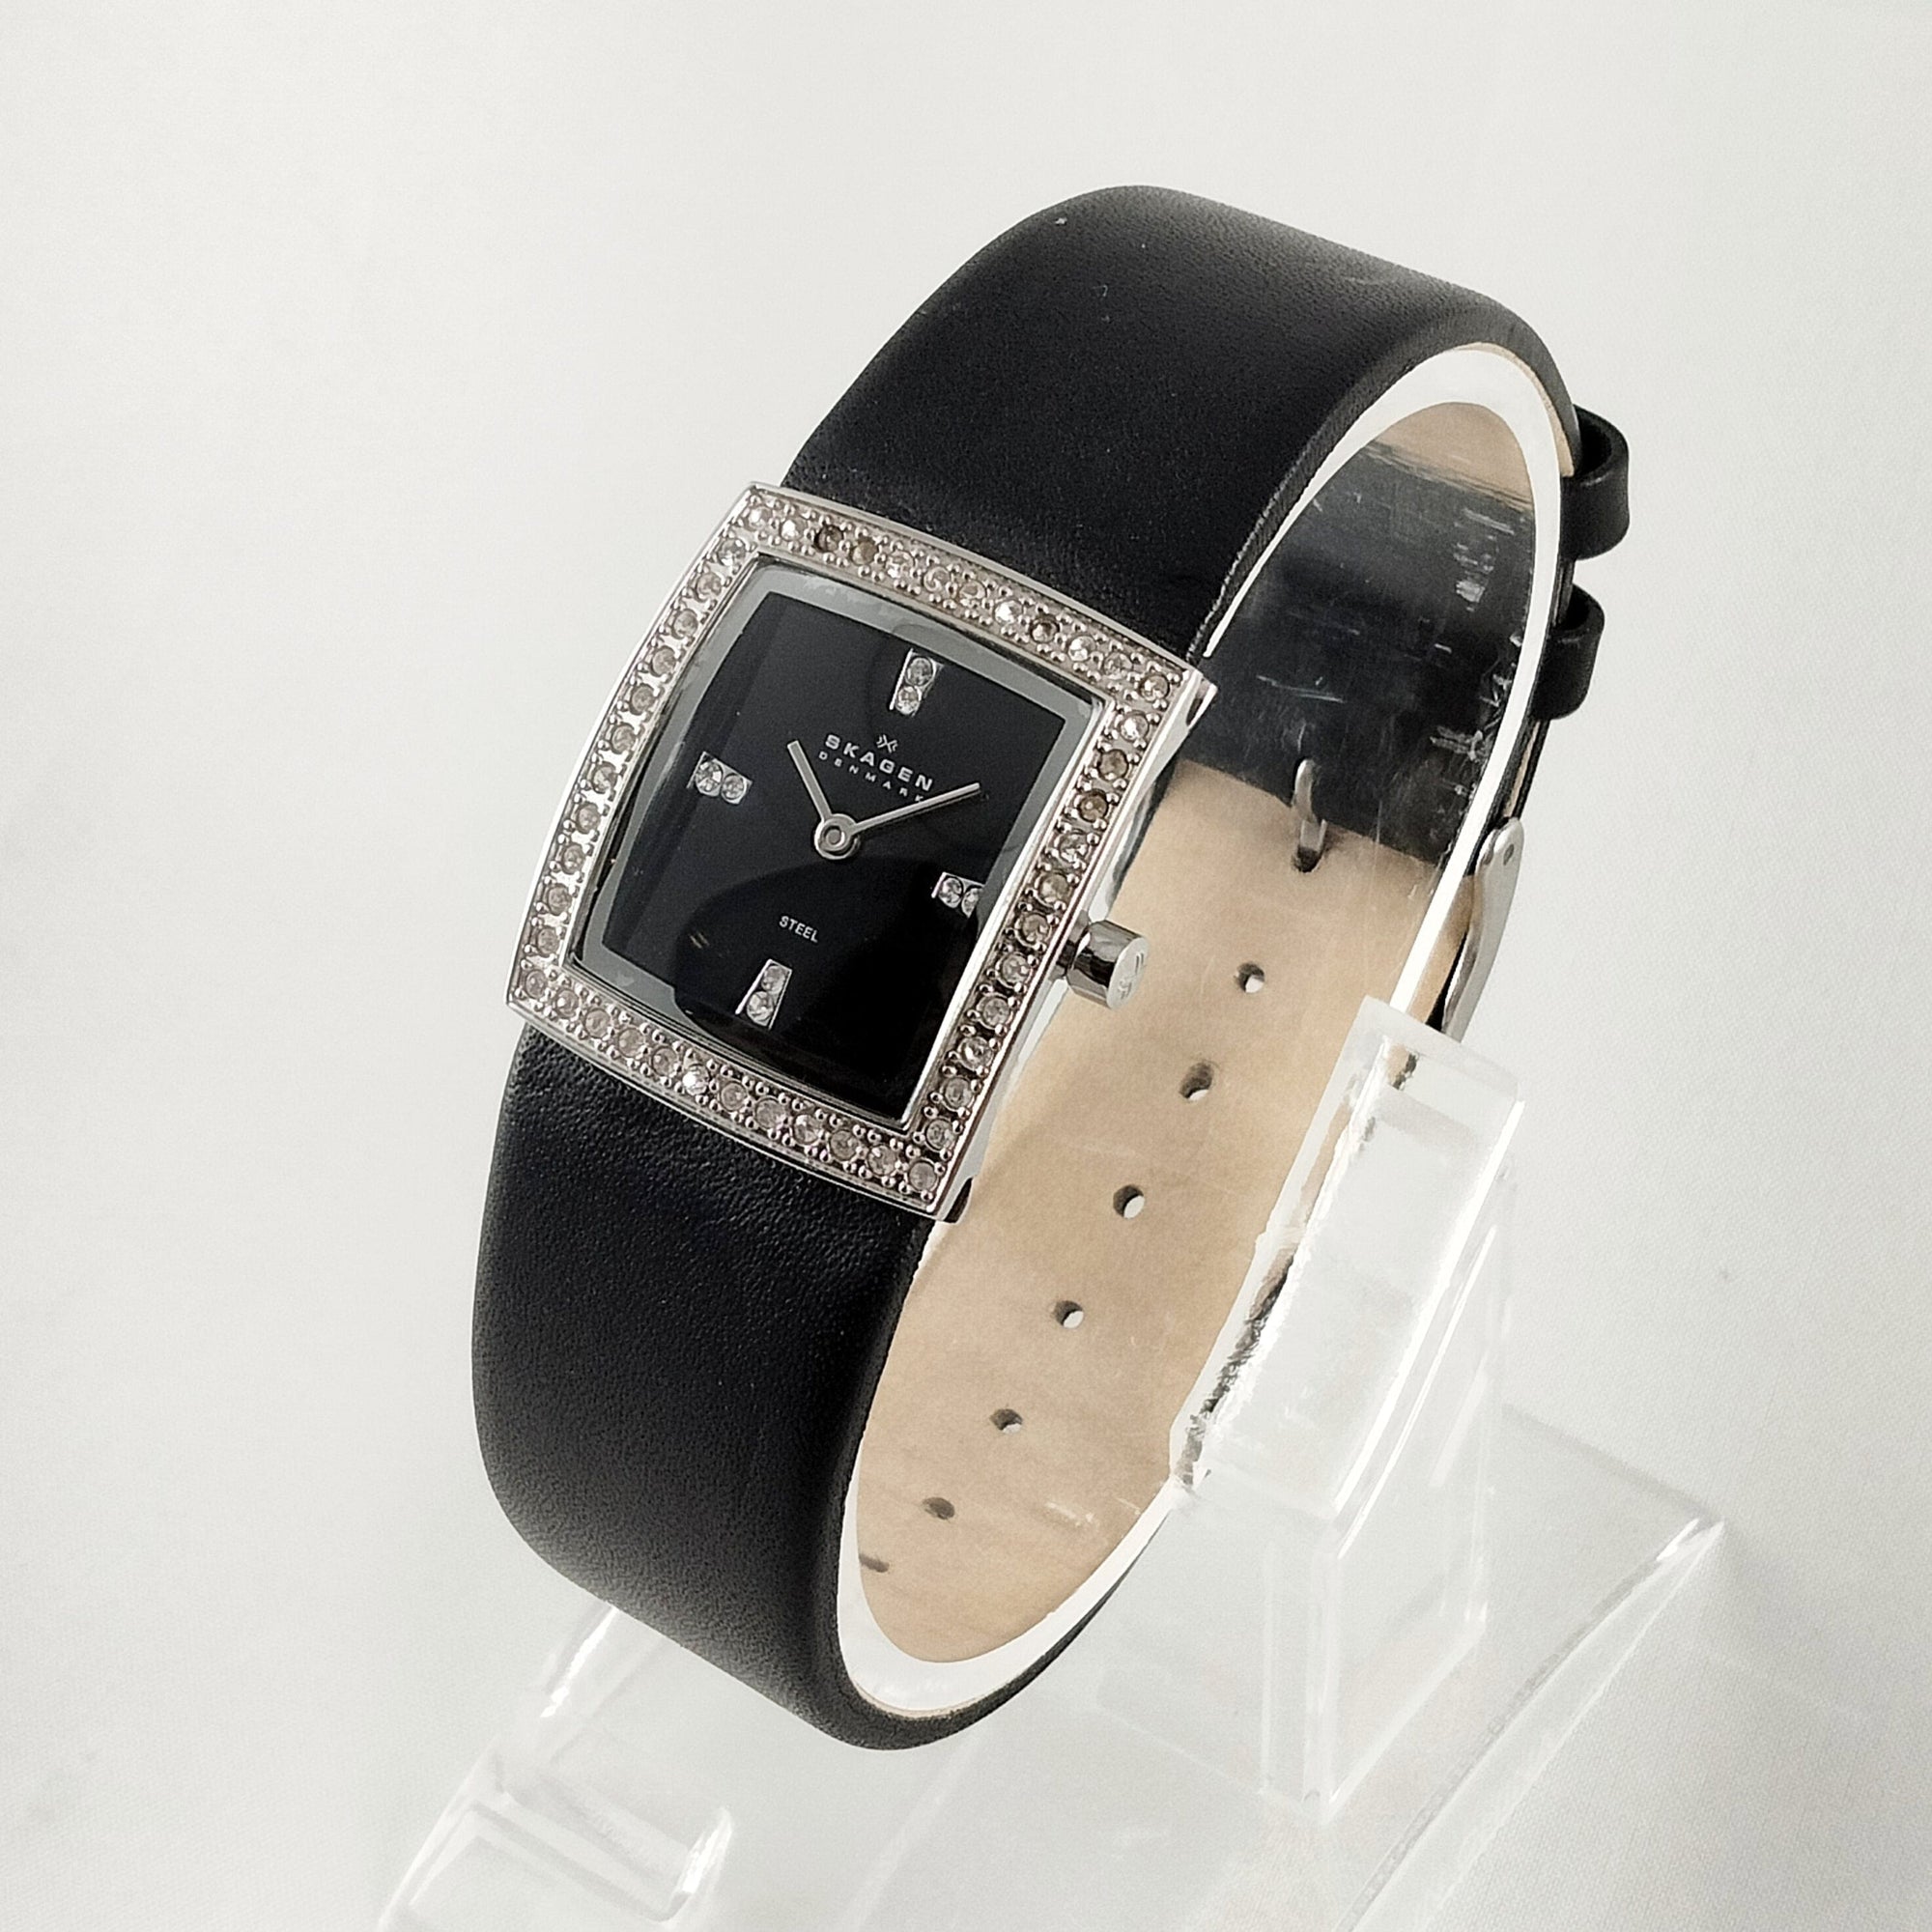 I Like Mikes Mid Century Modern Watches Skagen Women's Stainless Steel Square Watch, Jewel Details, Black Genuine Leather Strap